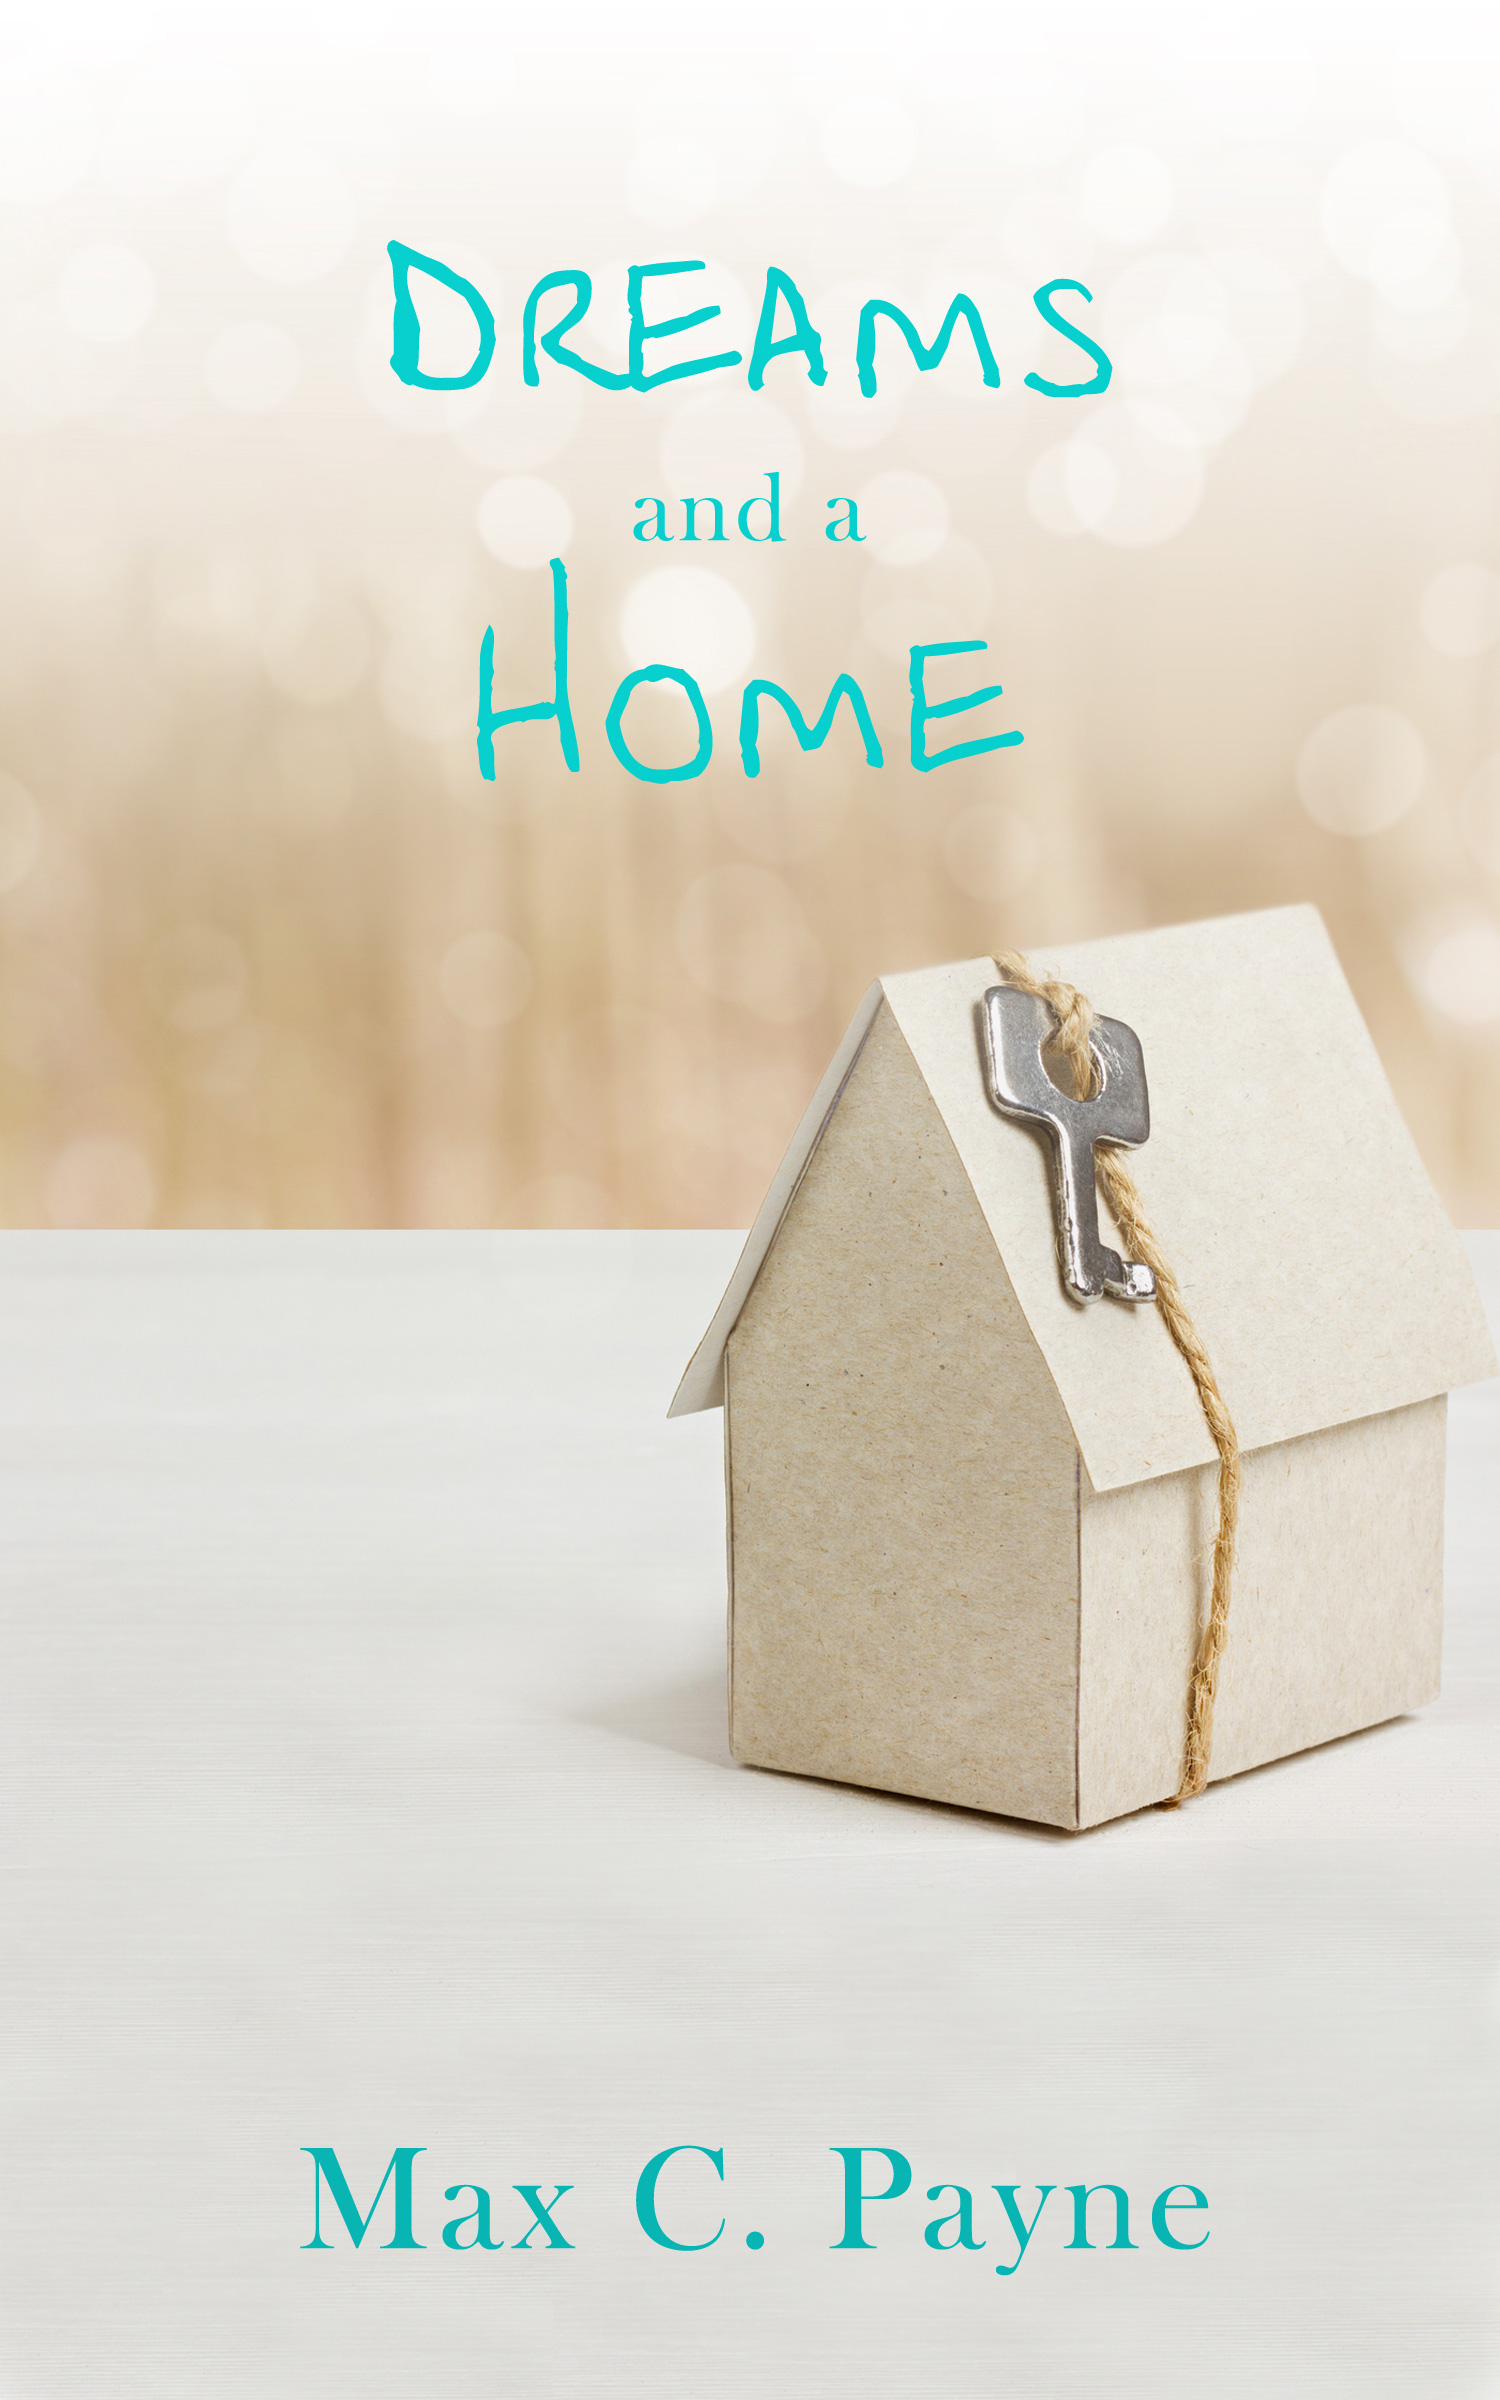 FREE: Dreams and a Home by Max C. Payne